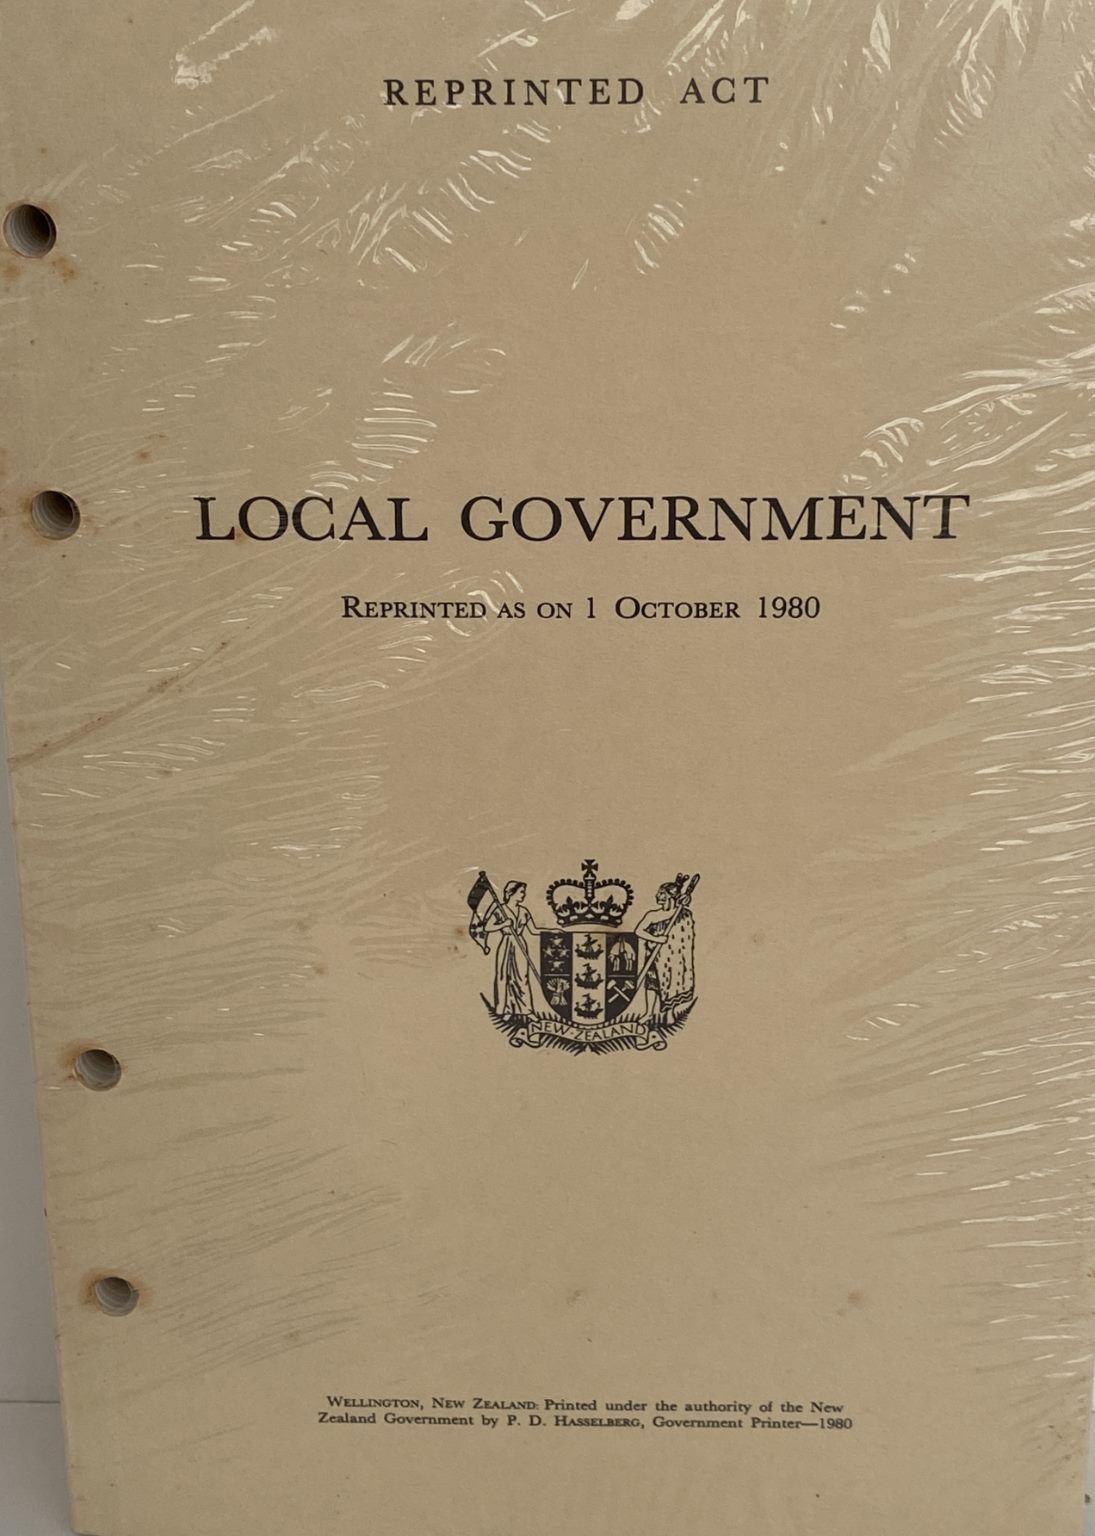 REPRINTED ACT of LOCAL GOVERMENT of NEW ZEALAND October 1981